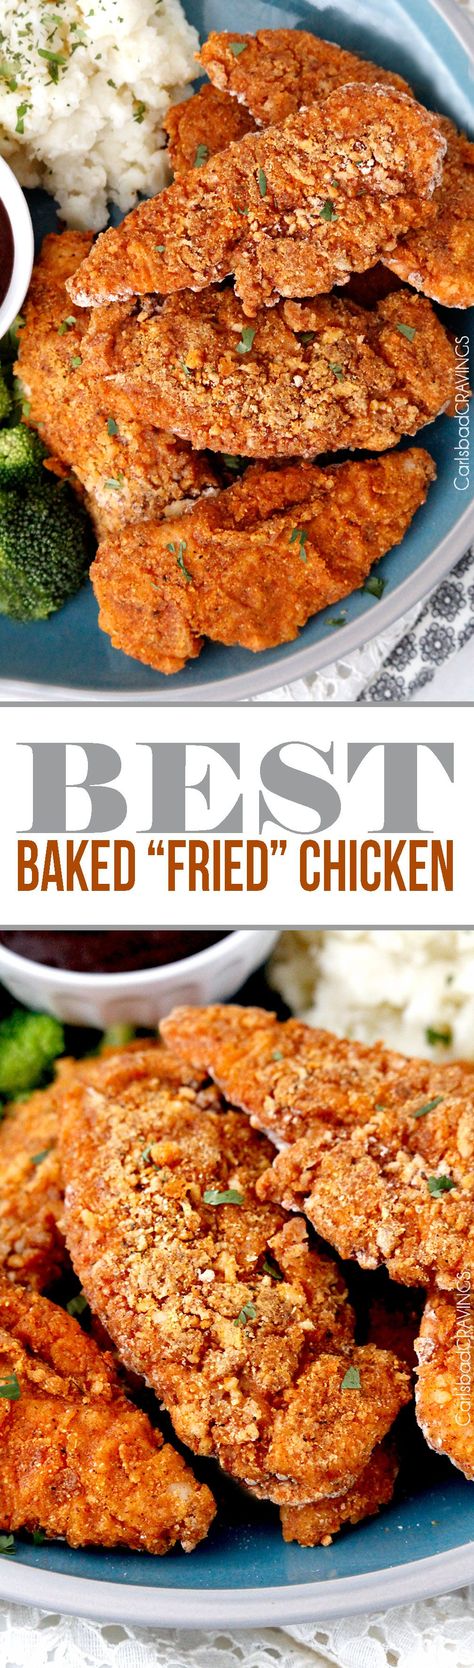 seriously the BEST Baked "fried" chicken! Crispy chicken marinated in spiced… Chicken Kfc, Baked Fried Chicken, Chicken Crispy, Chicken Marinated, Oven Fried, Oven Fried Chicken, Ayam Goreng, Foods Recipes, Chicken Main Dishes